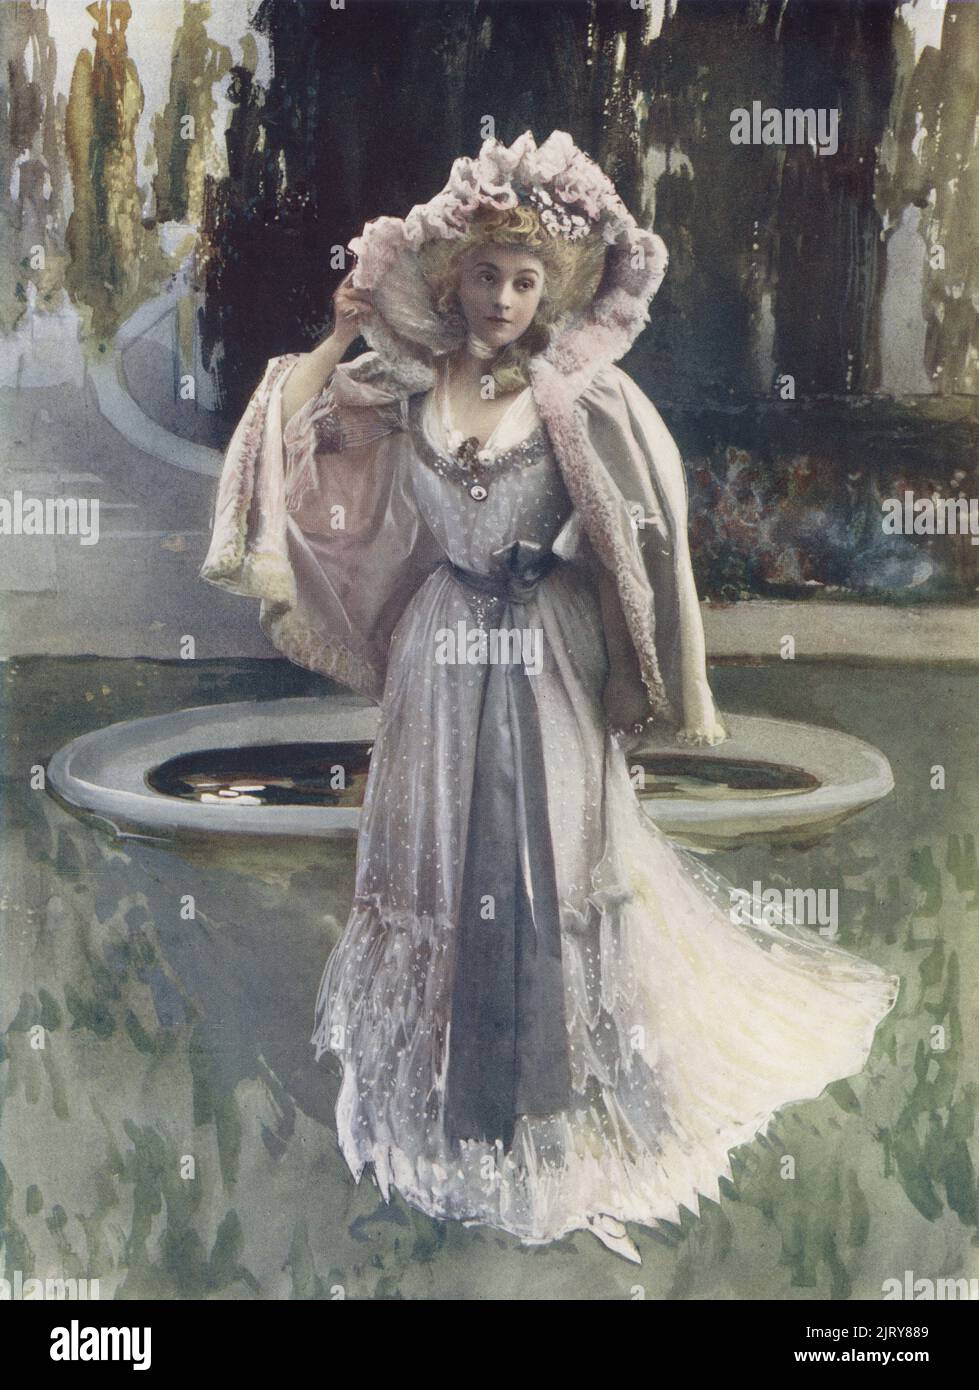 Mme. Gabrielle Rejane in Sylvie, ou la Curieuse d'amour, a stage play by Abel Hermant, music by Edmond Laurens, 1900. Gabrielle Charlotte Reju, French stage and film actress, 1856-1920. Photo by Leopold Emile Reutlinger. Colour printing of a hand-coloured illustration based on a monochrome photograph from George Newnes’s Players of the Day, London, 1905. Stock Photo